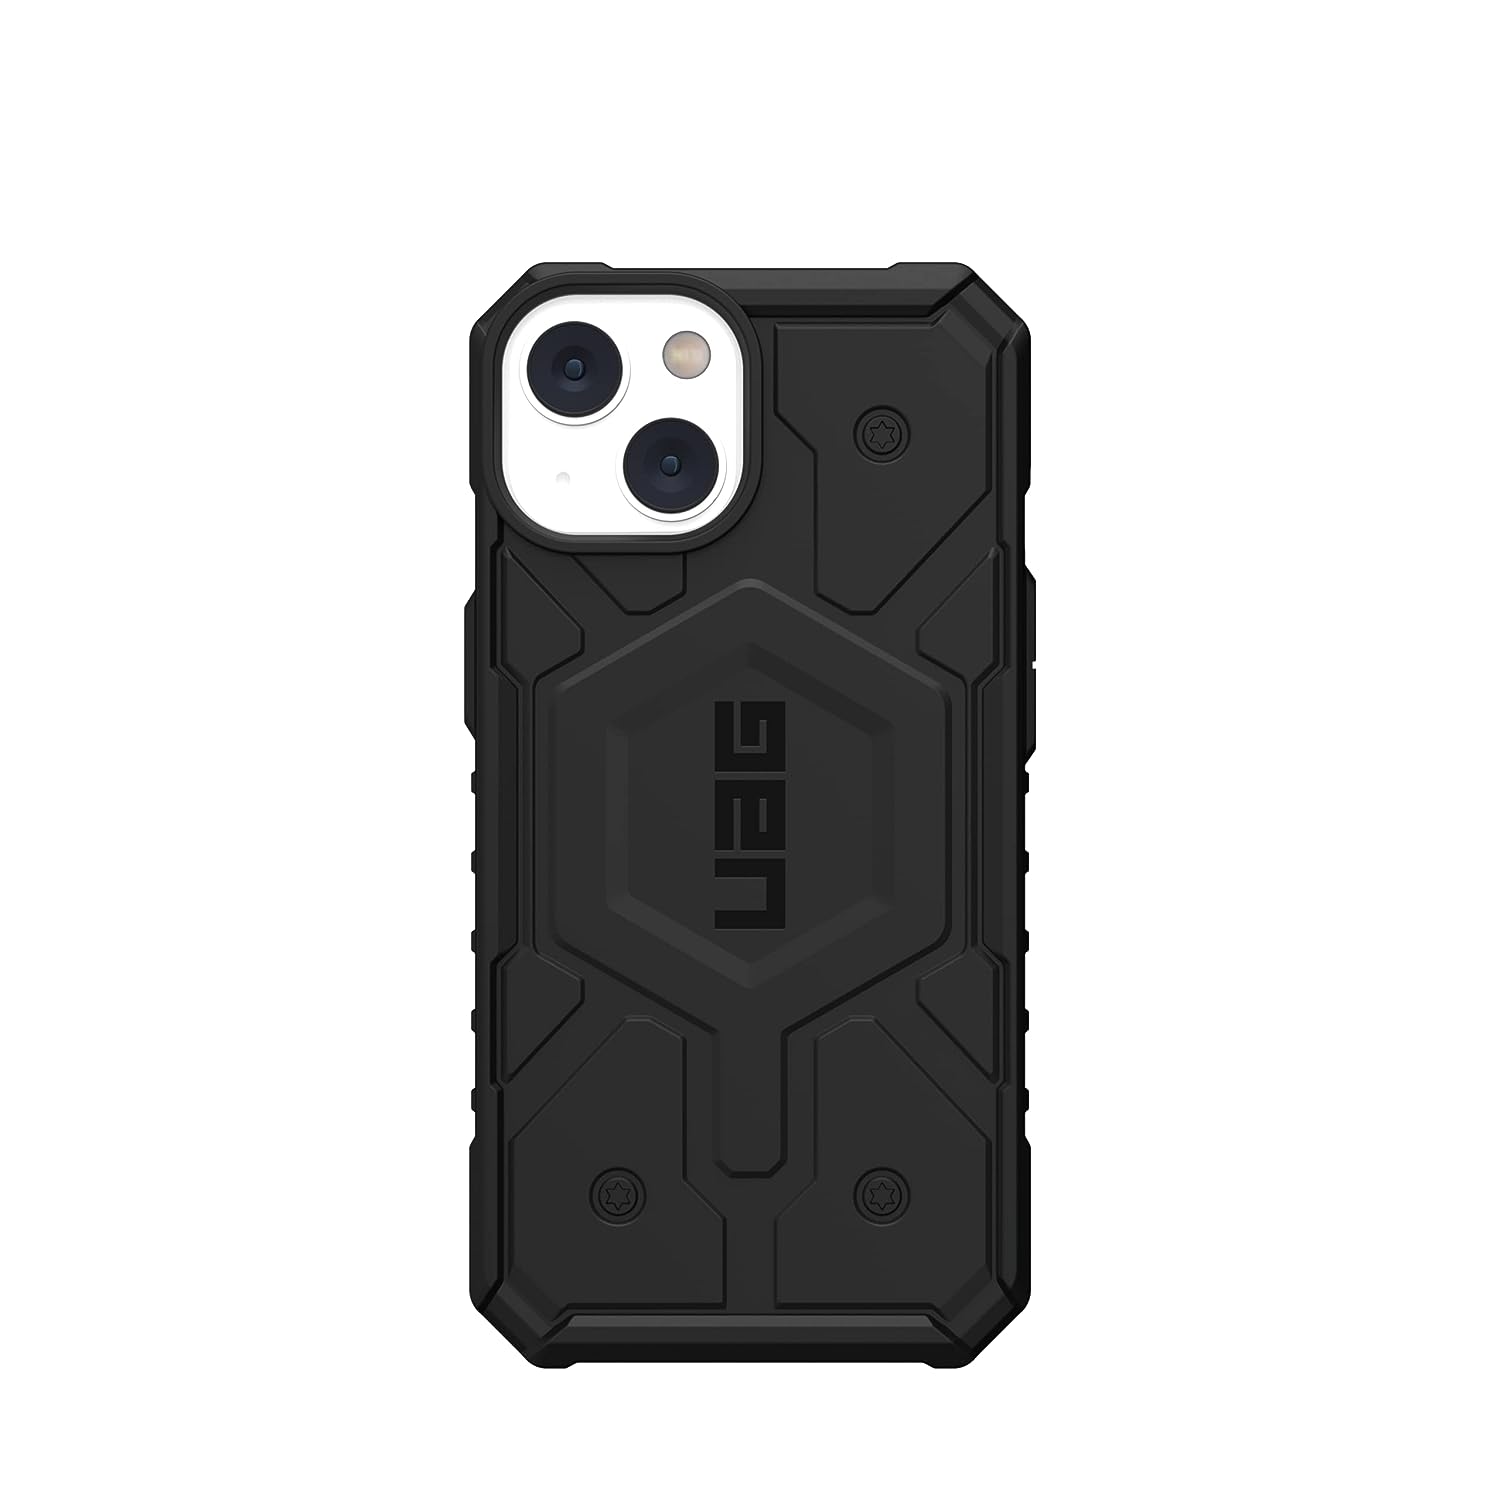 iPhone 14 Pro Max Armor Cover | Urban Armor iPhone 14 Pro Max Case, UAG Pathfinder Mag-Safe Compatible, Slim Fit Rugged Protective Case/Cover Designed for iPhone 14 Pro Max (2022) (Military Drop Tested) - Black